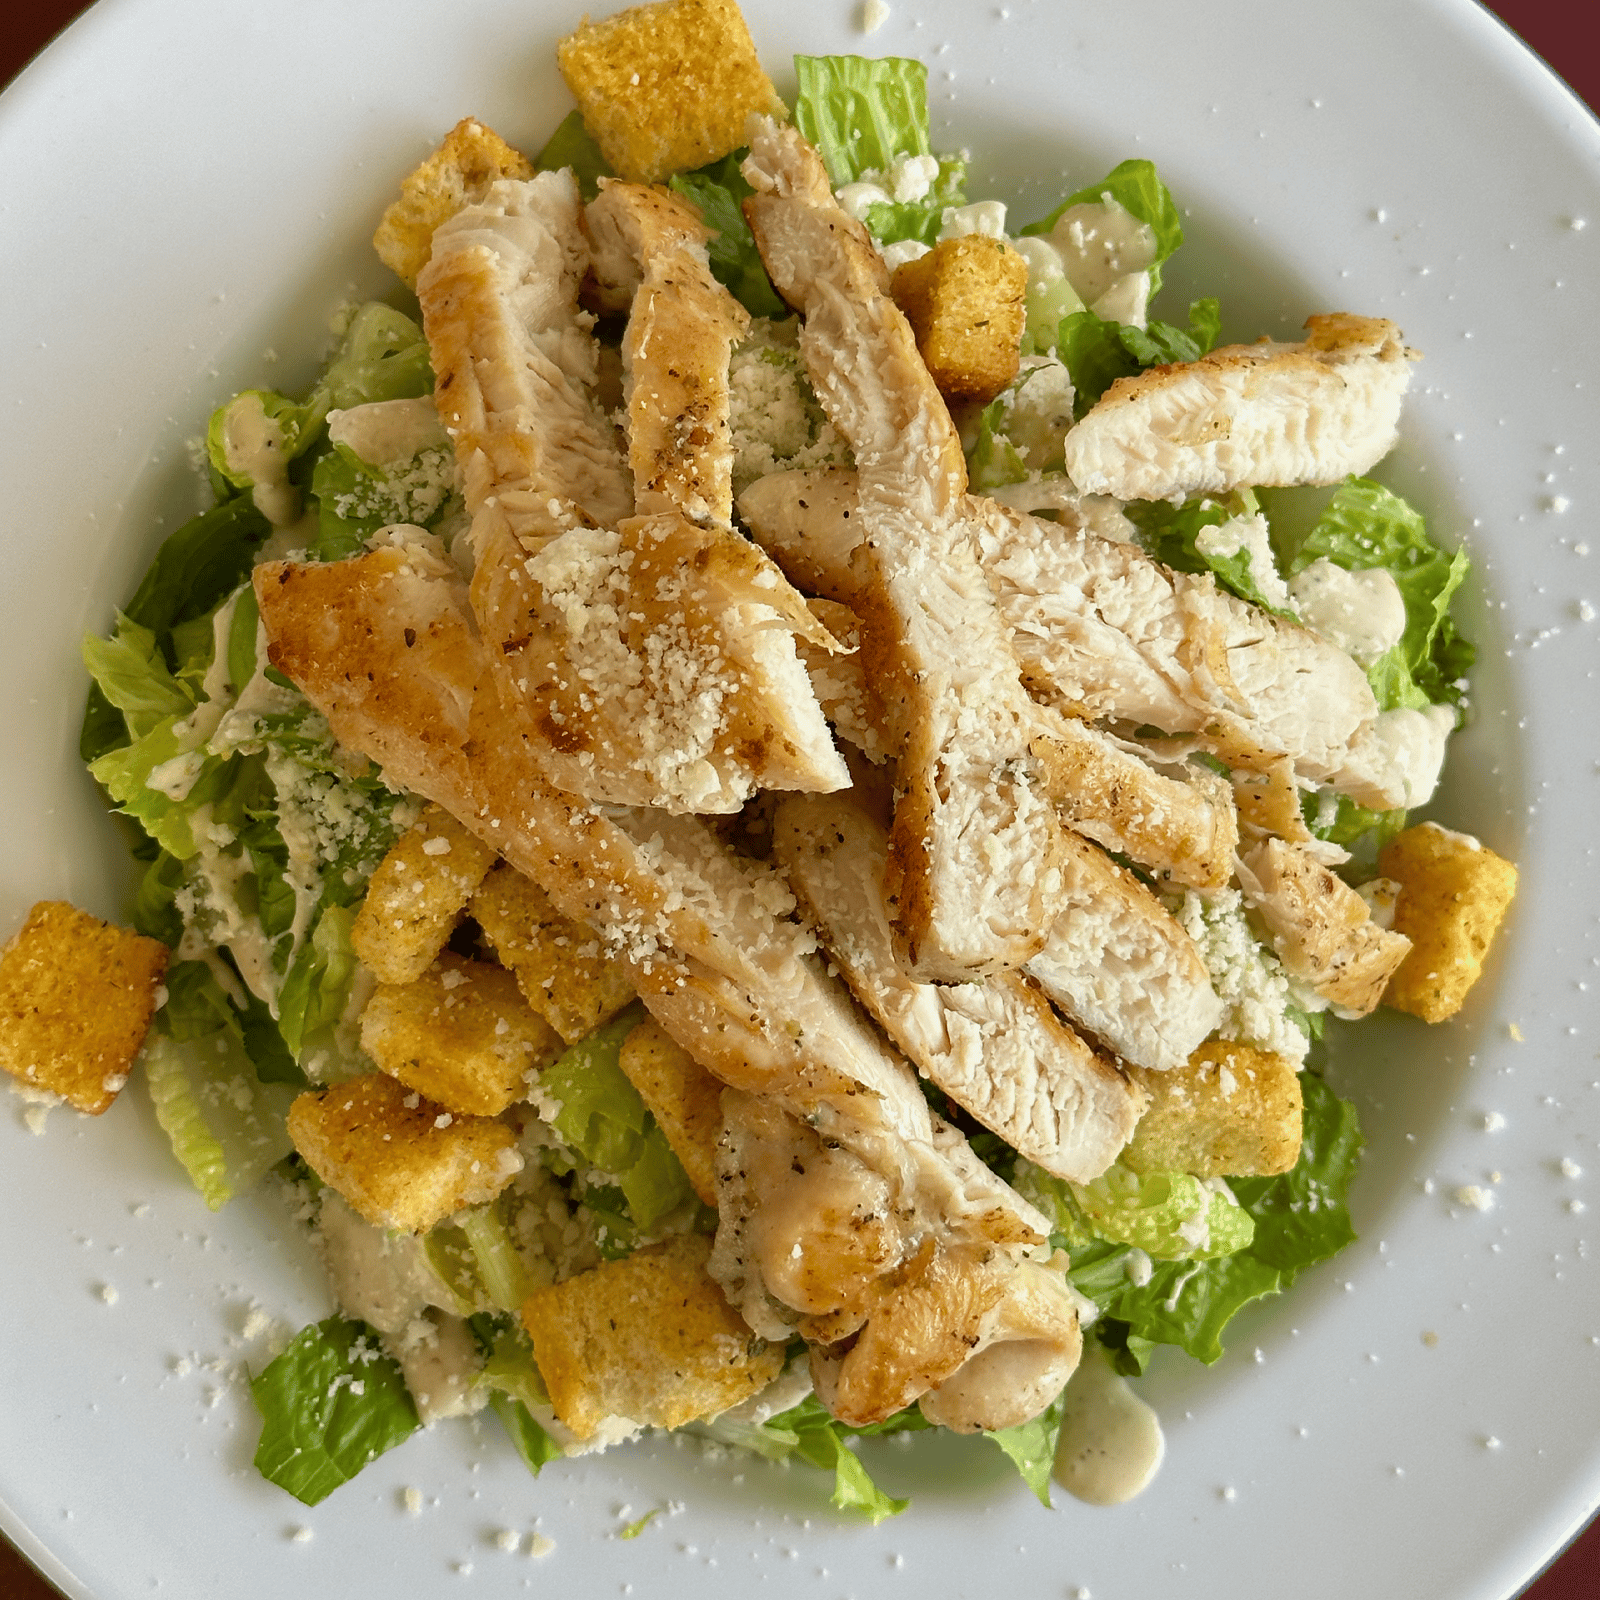 Classic Caesar Salad and More at Our Restaurant